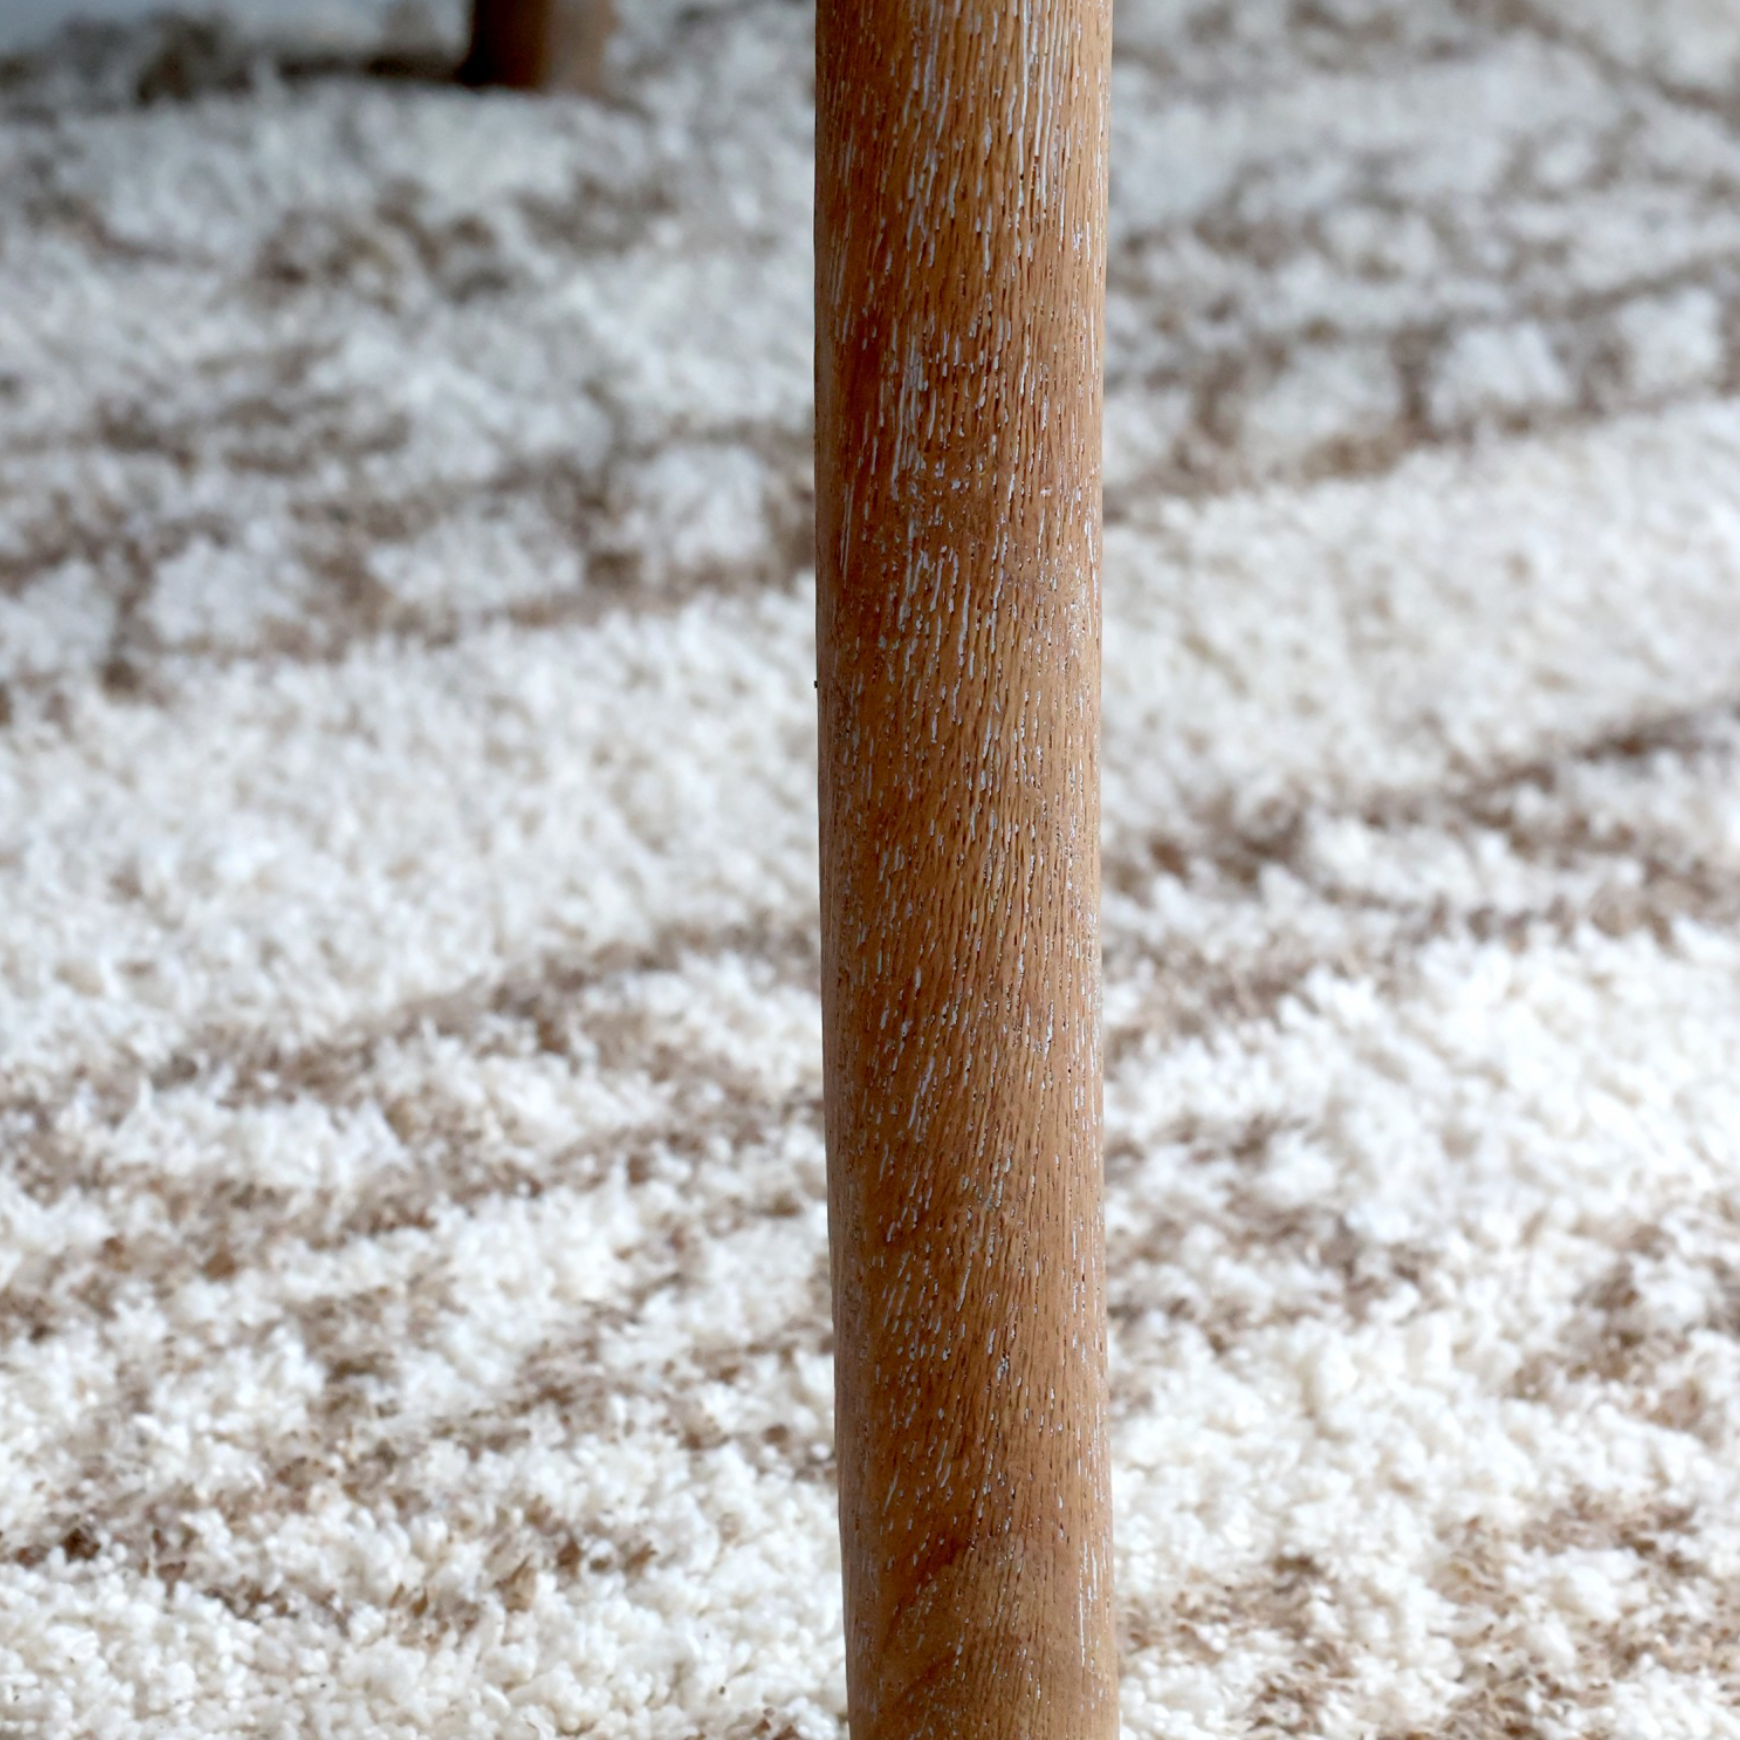 A close up image of a wooden dining chair's leg.